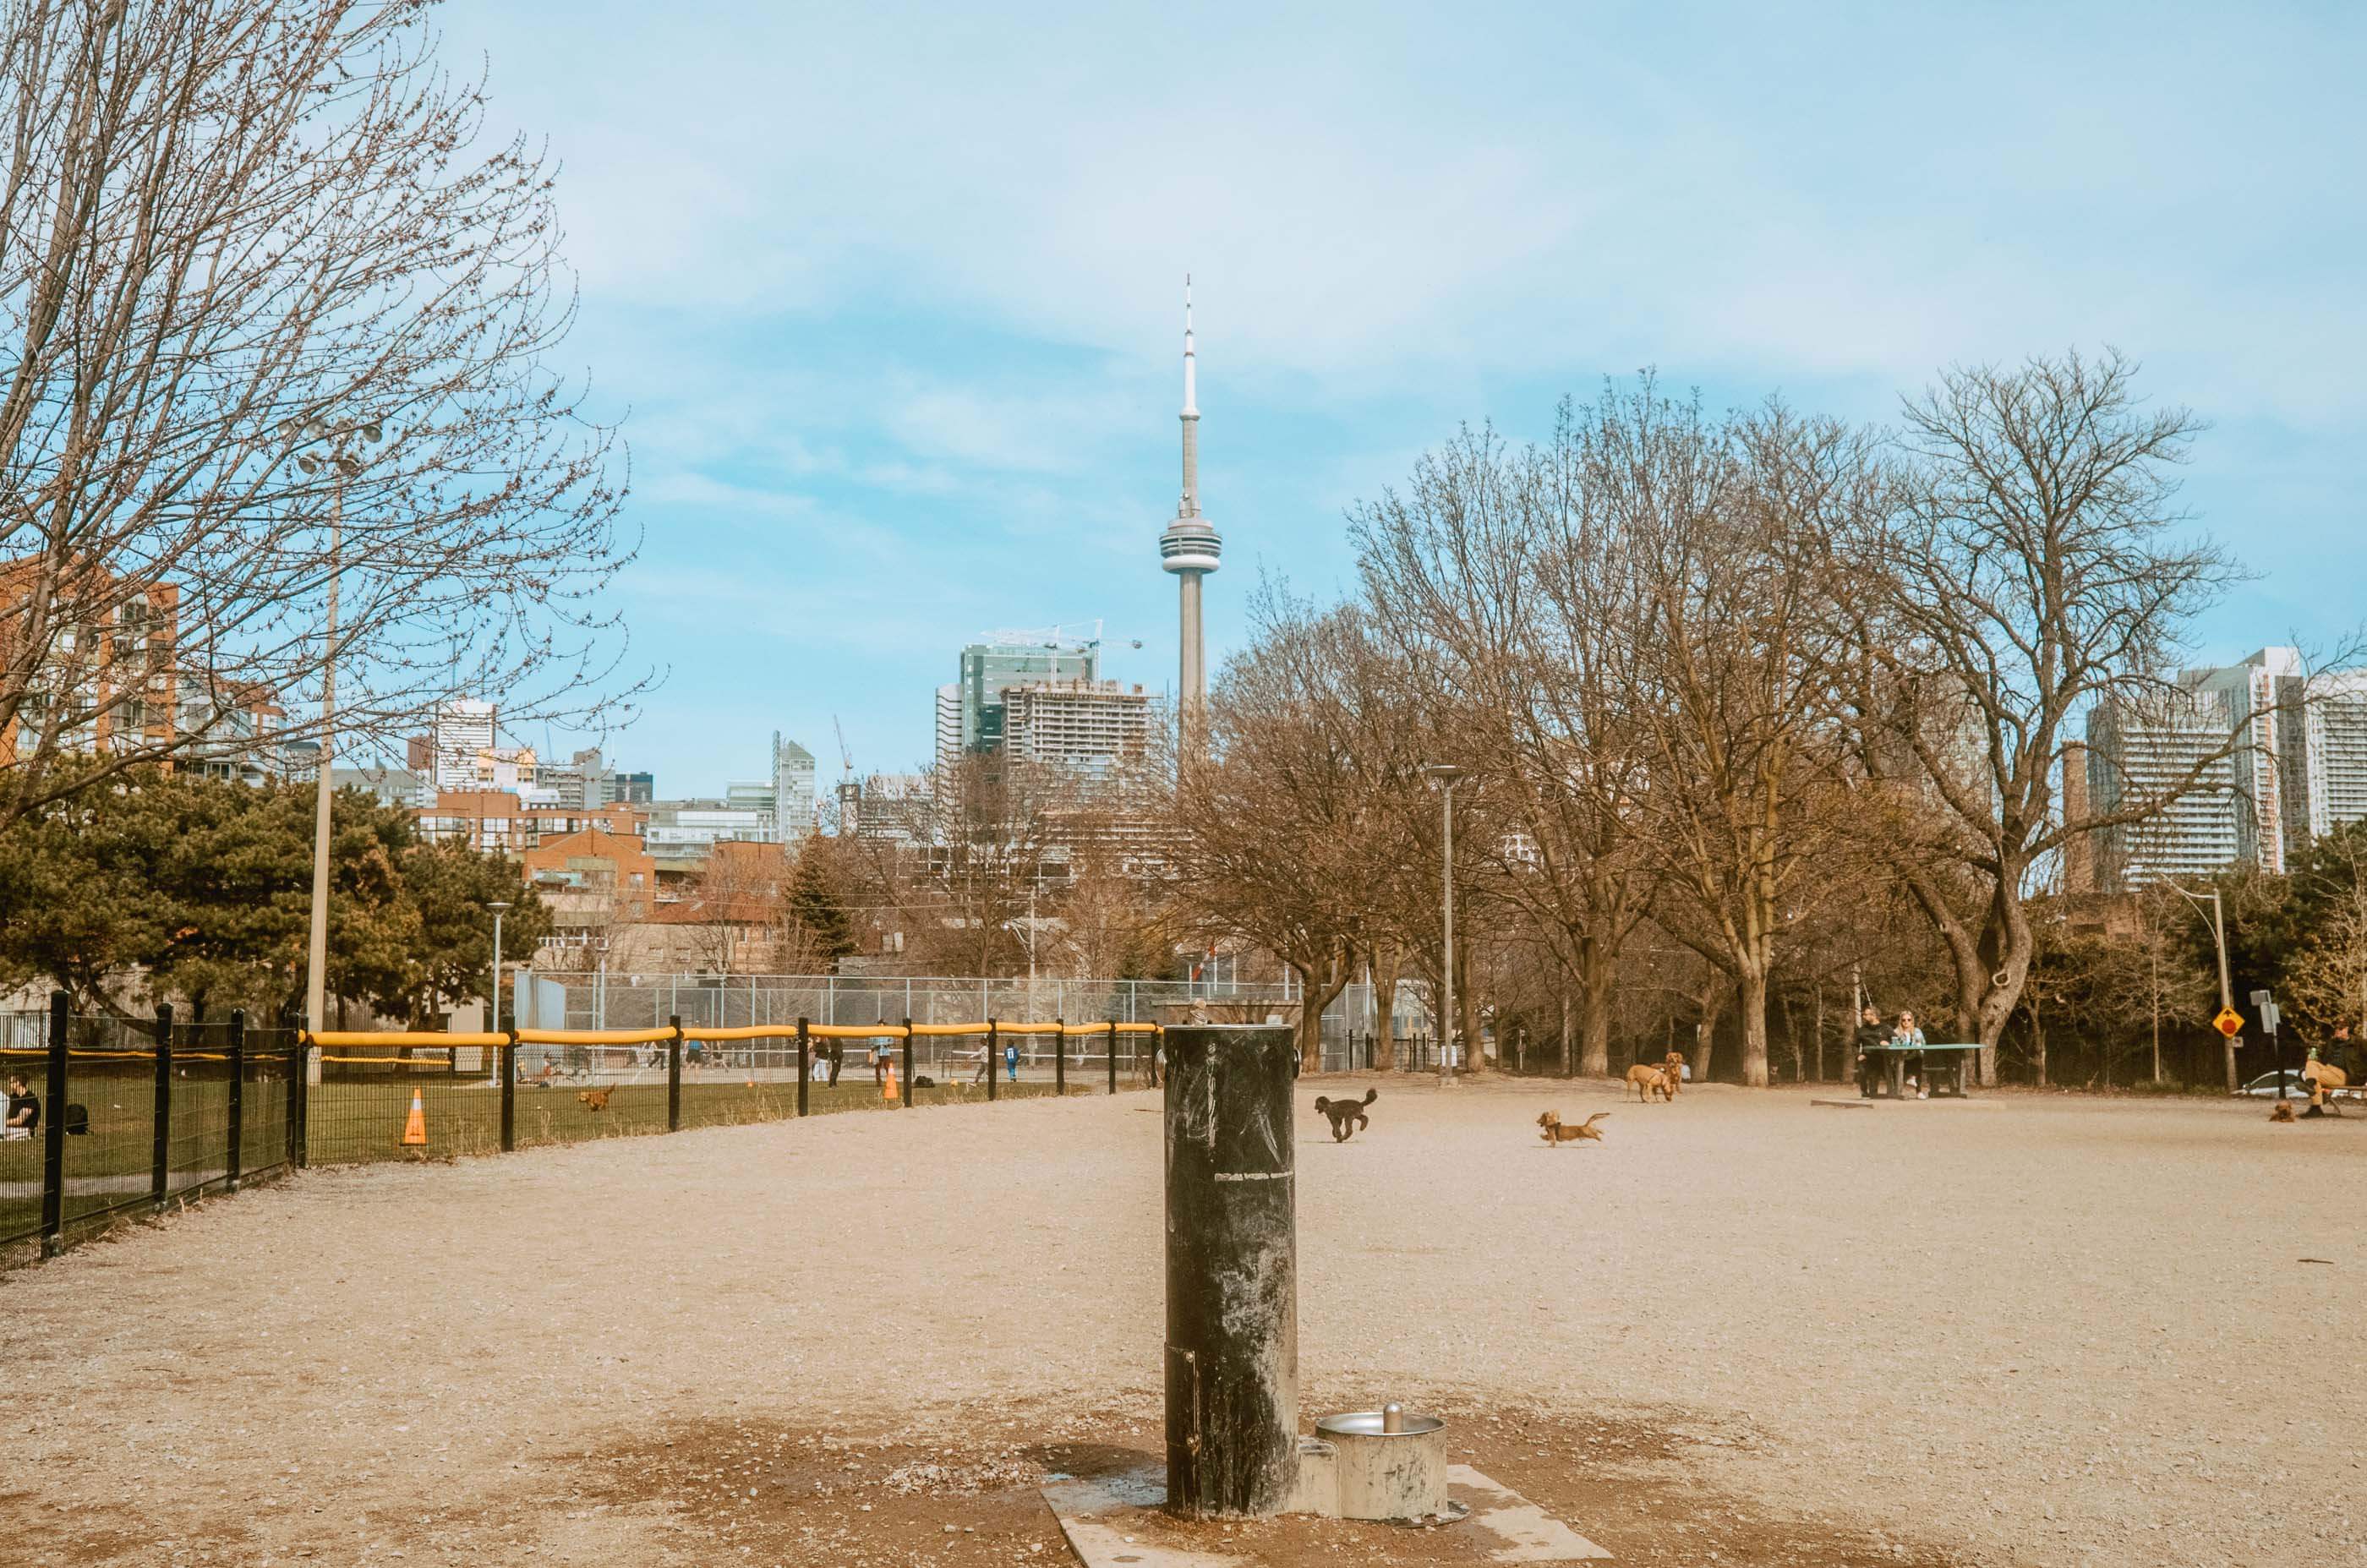 CN Tower and a dog fountain located at South Stanley Dog Park are centered in the image. Dogs are running off-leash in the distance inside the dog park.